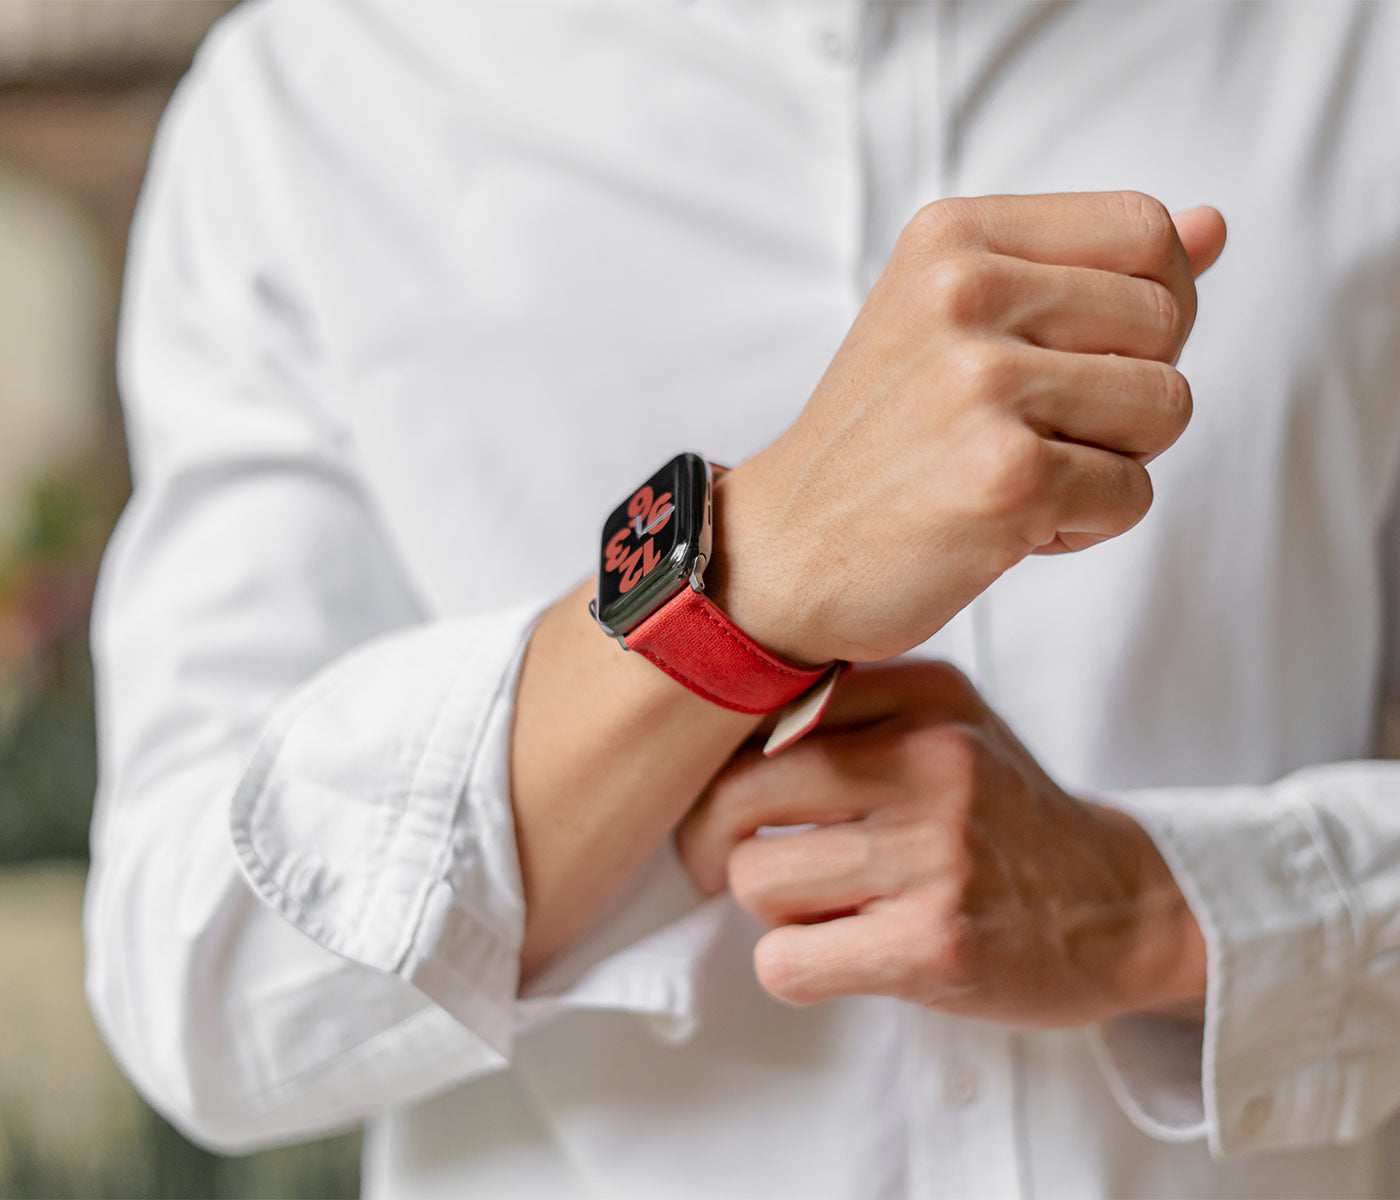 REcycled Red Apple Watch Band